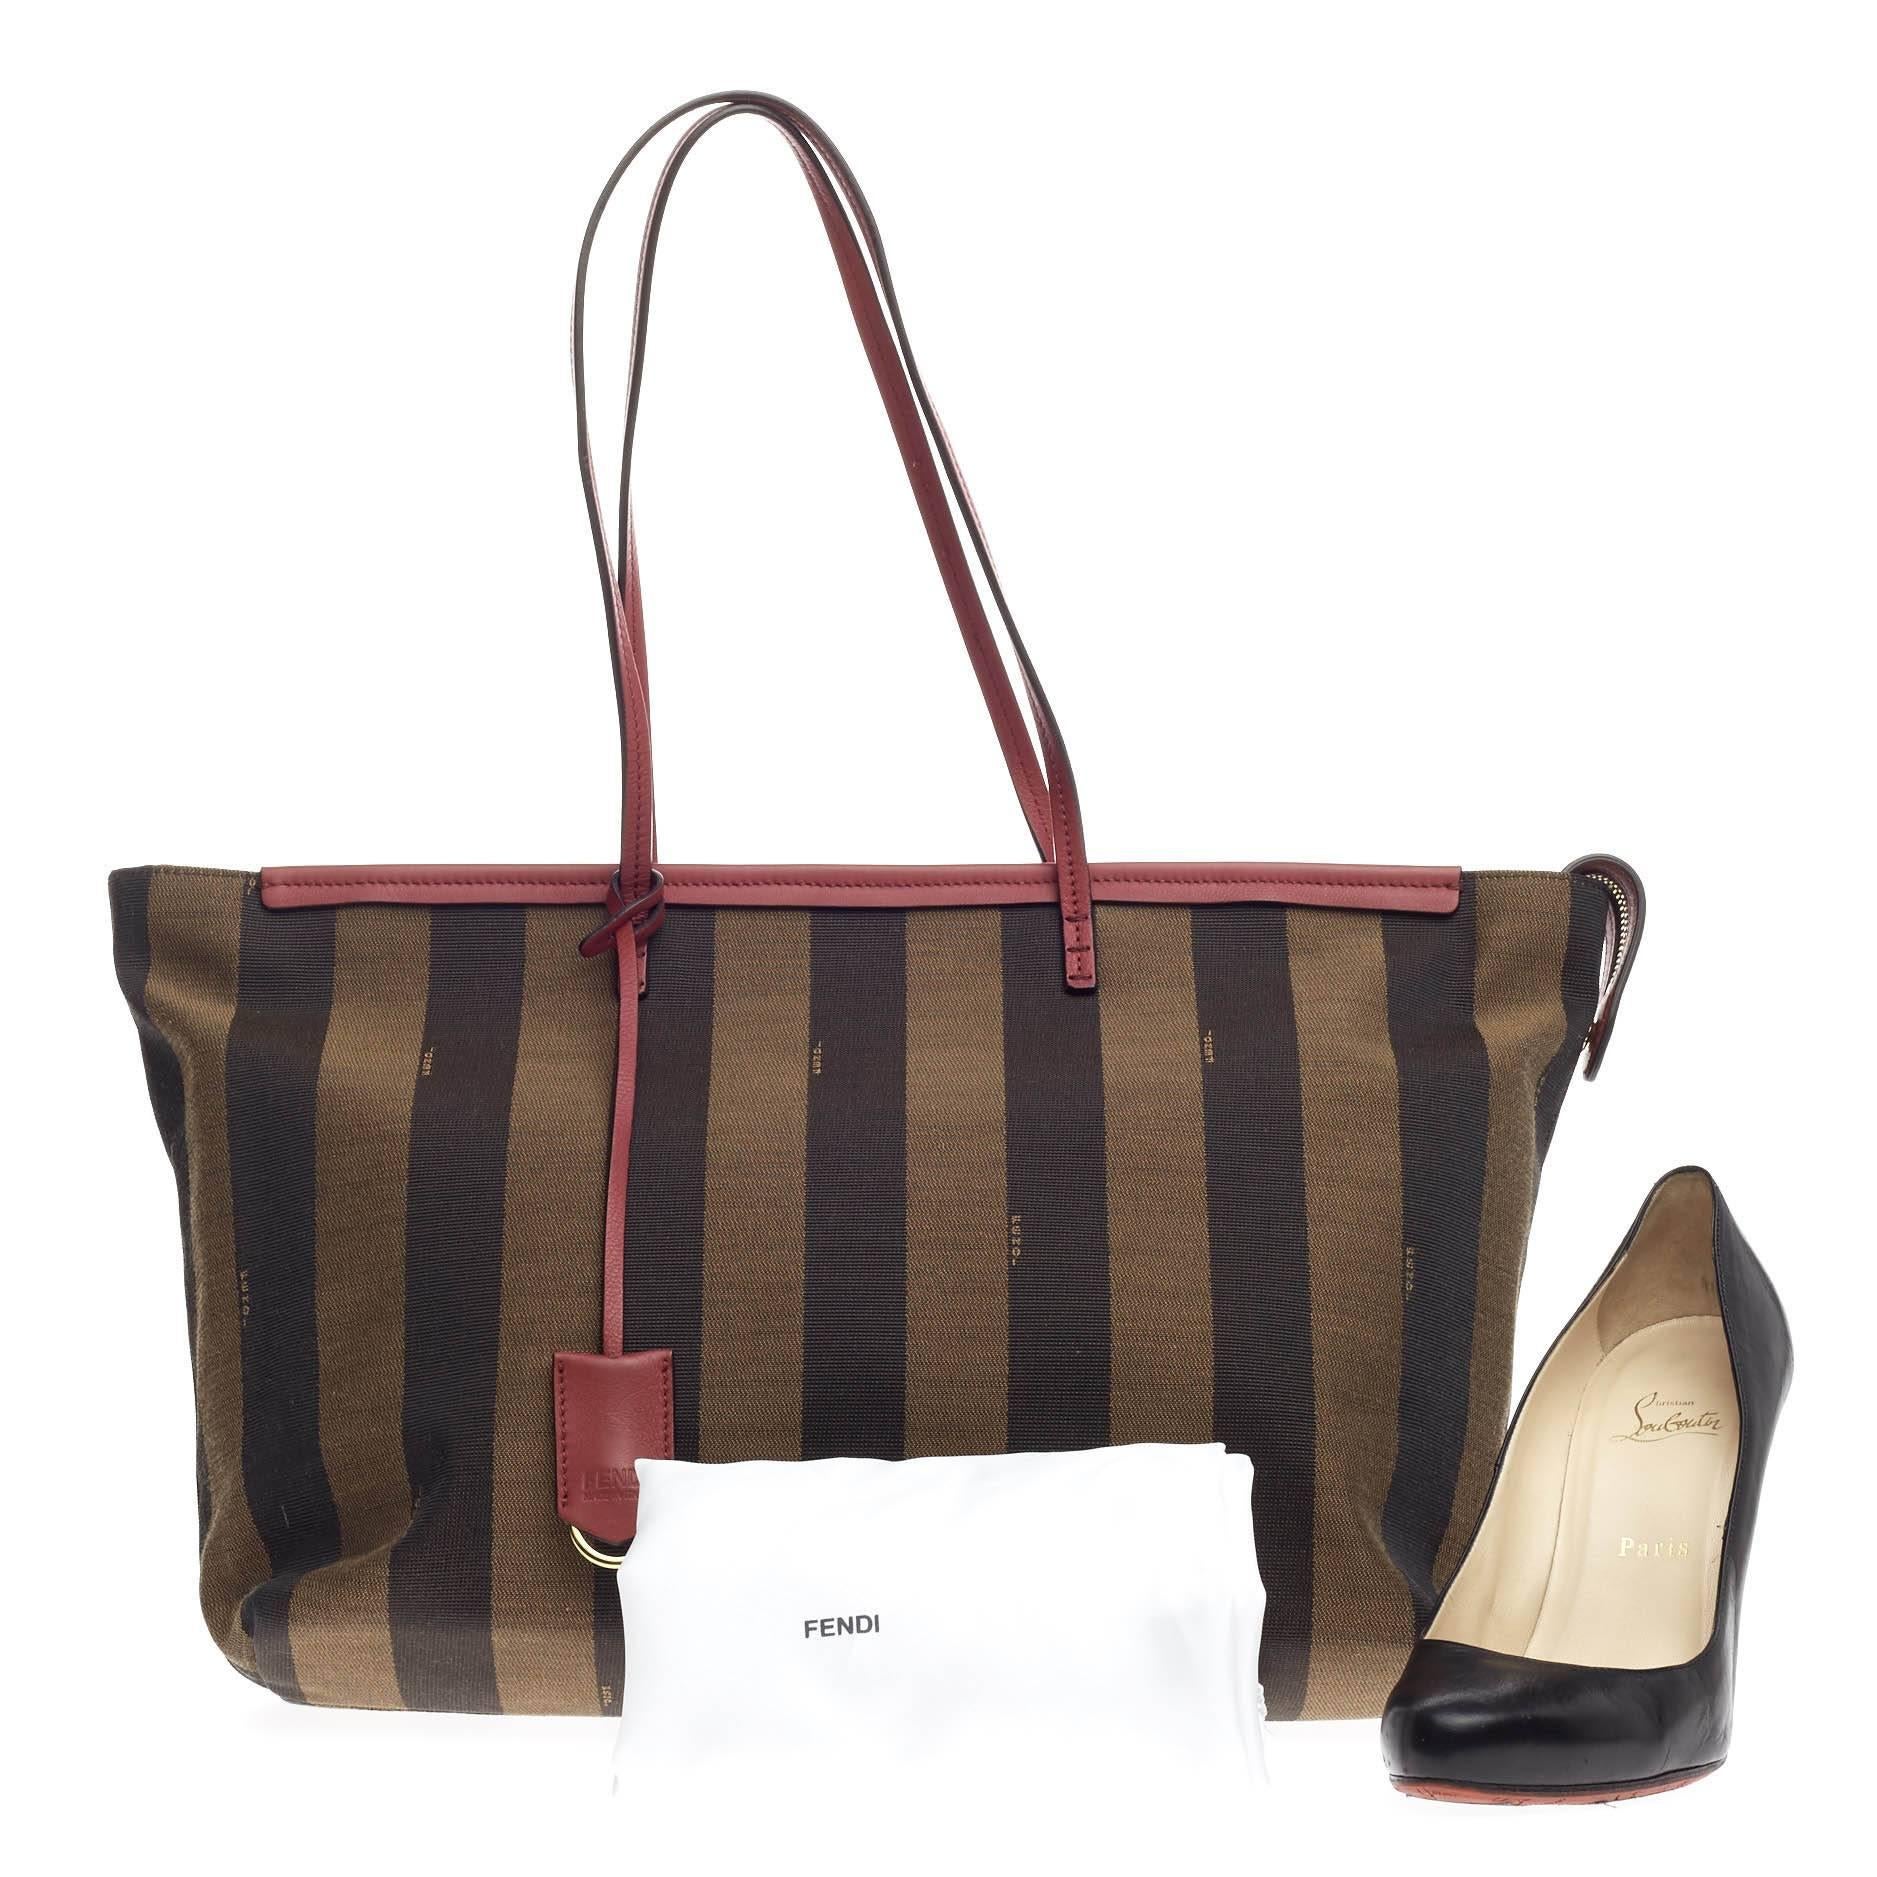 This authentic Fendi Pequin Roll Tote Canvas Large is simple and classic ideal for everyday use. Crafted from brown pequin-striped fabric with pink leather trims, this tote features tall flat handles, hanging key charm and gold-tone hardware